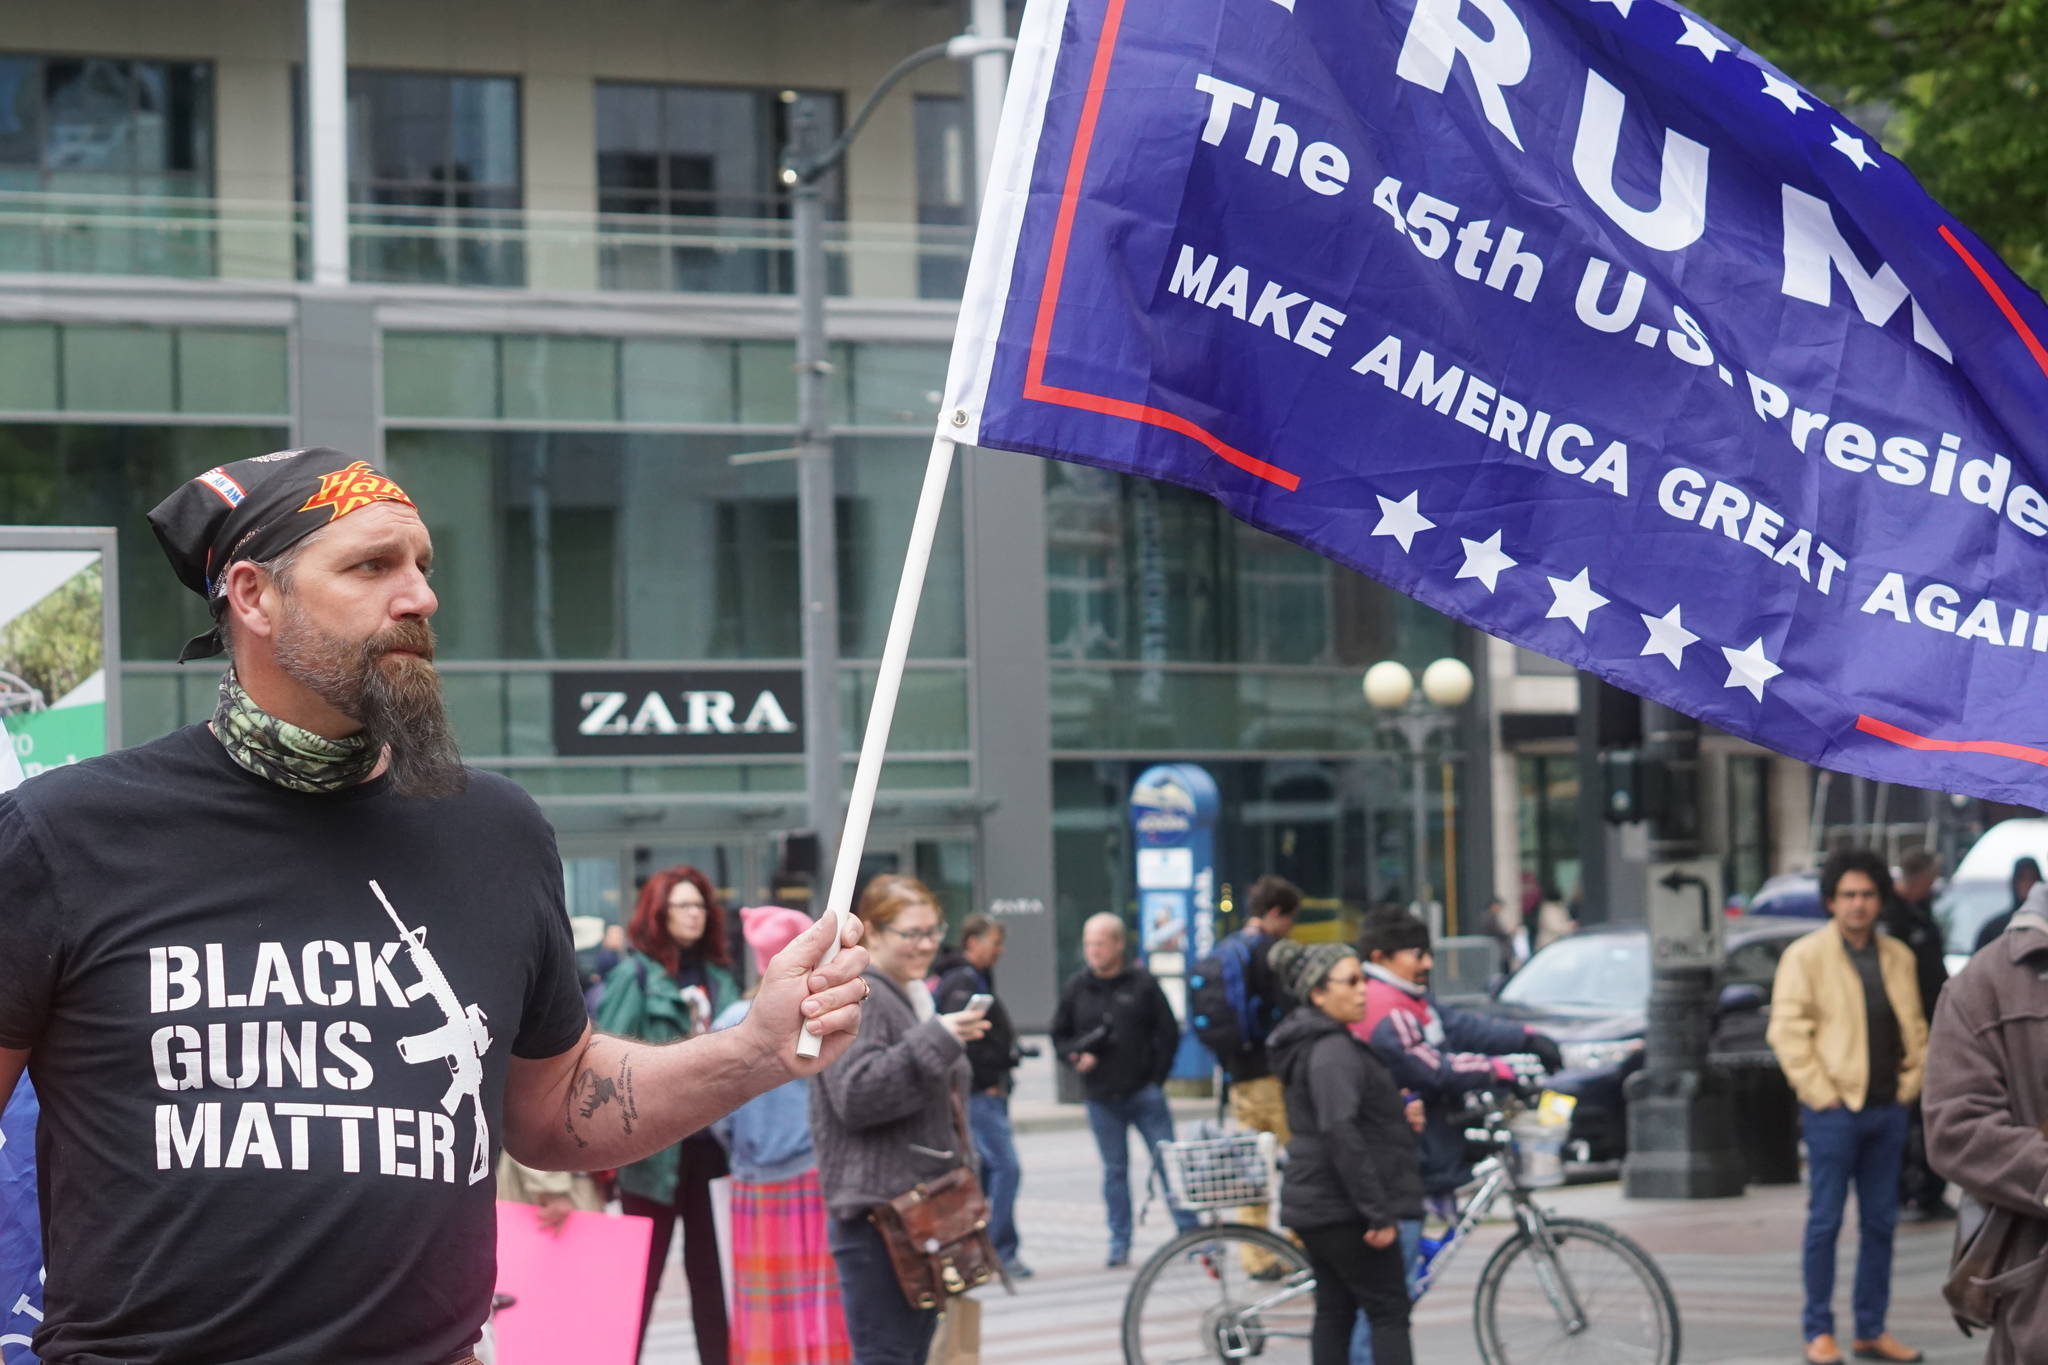 Activists on the right have made their presence known in liberal bastions like Seattle recently. This man turned out for the May 1 Immigrant Rally at Westlake Park. Photo by Agatha Pacheco